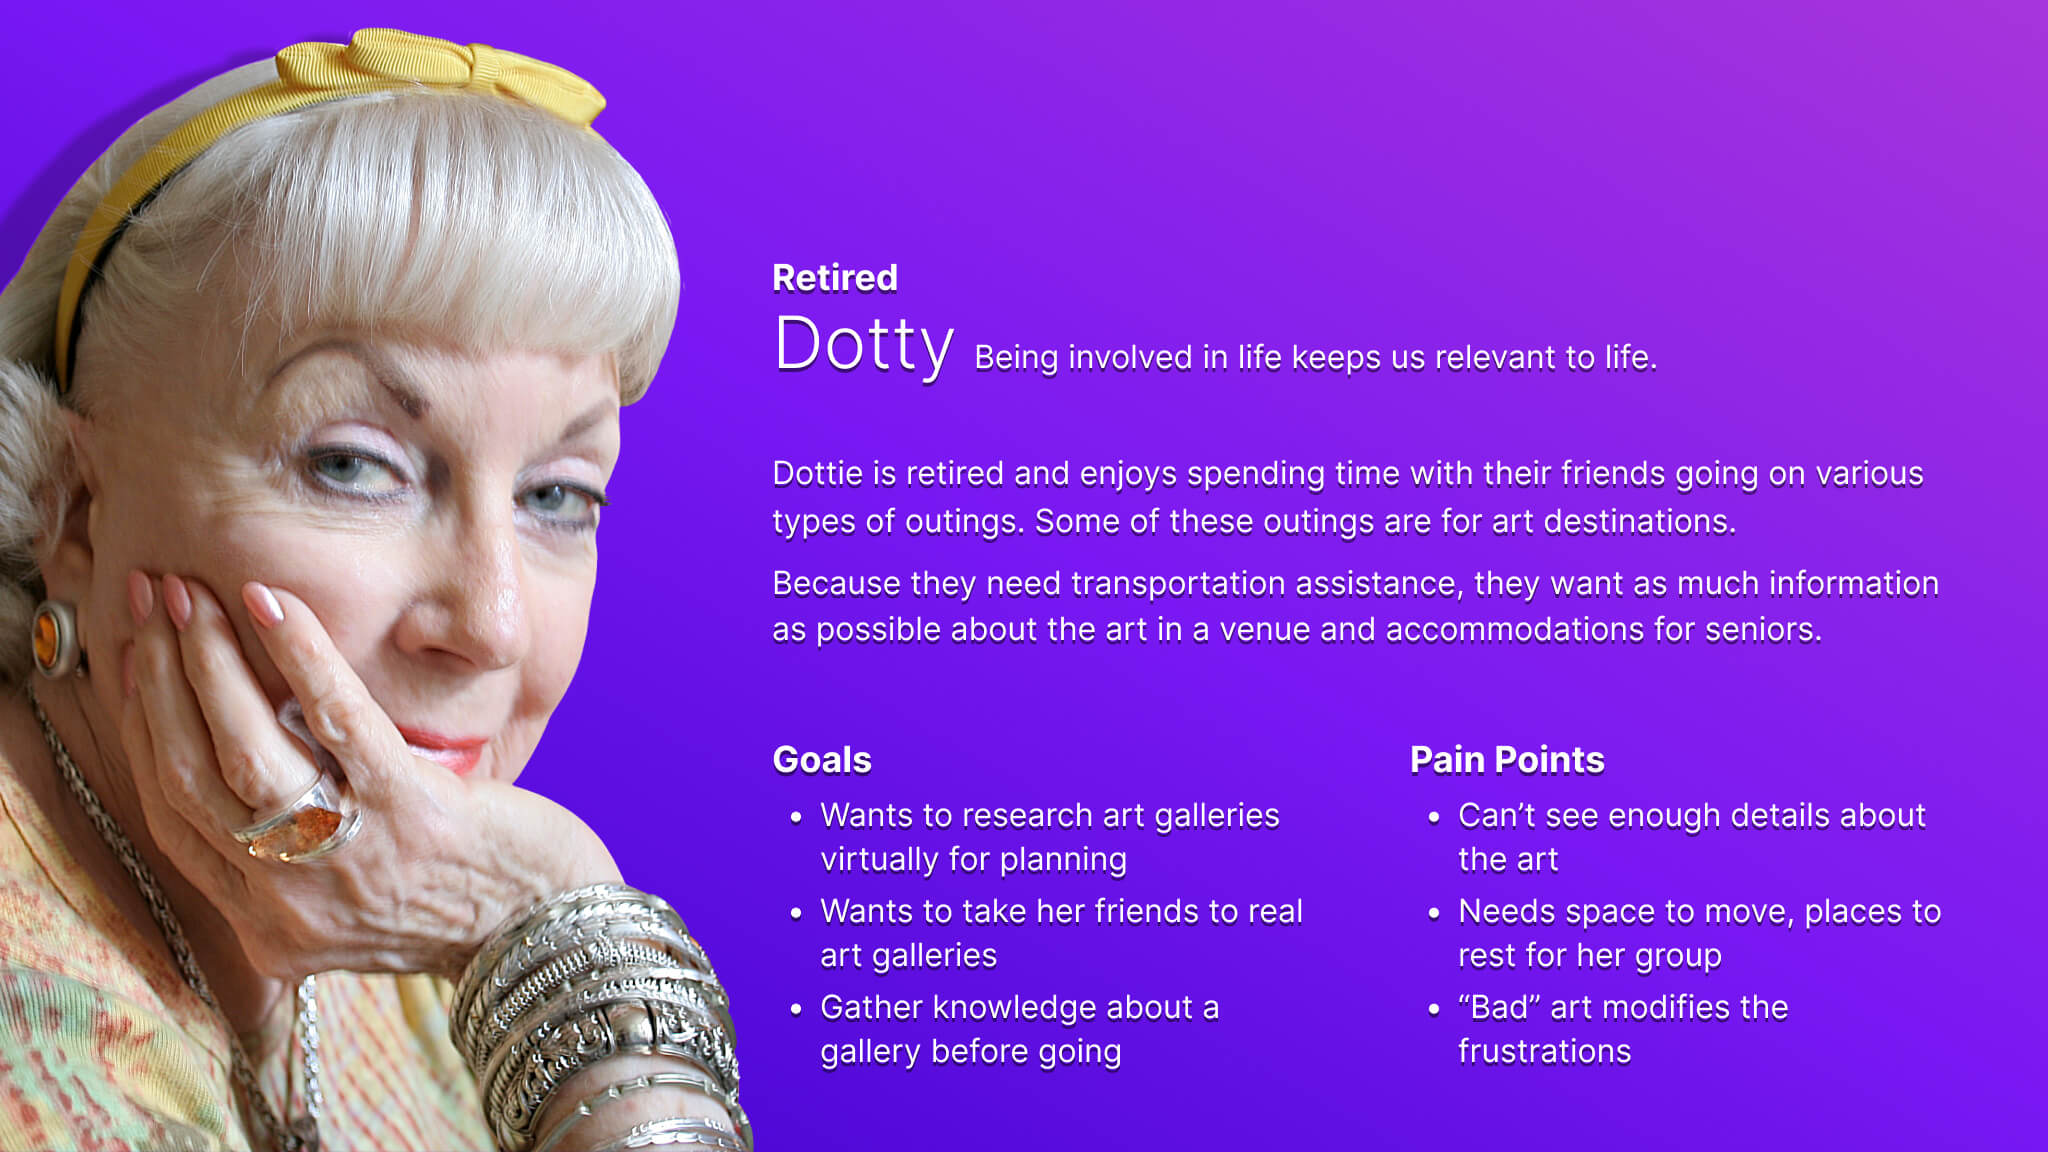 Persona card for Dotty who represents users who are older and use the app to plan their visits rather than consume art in the app.